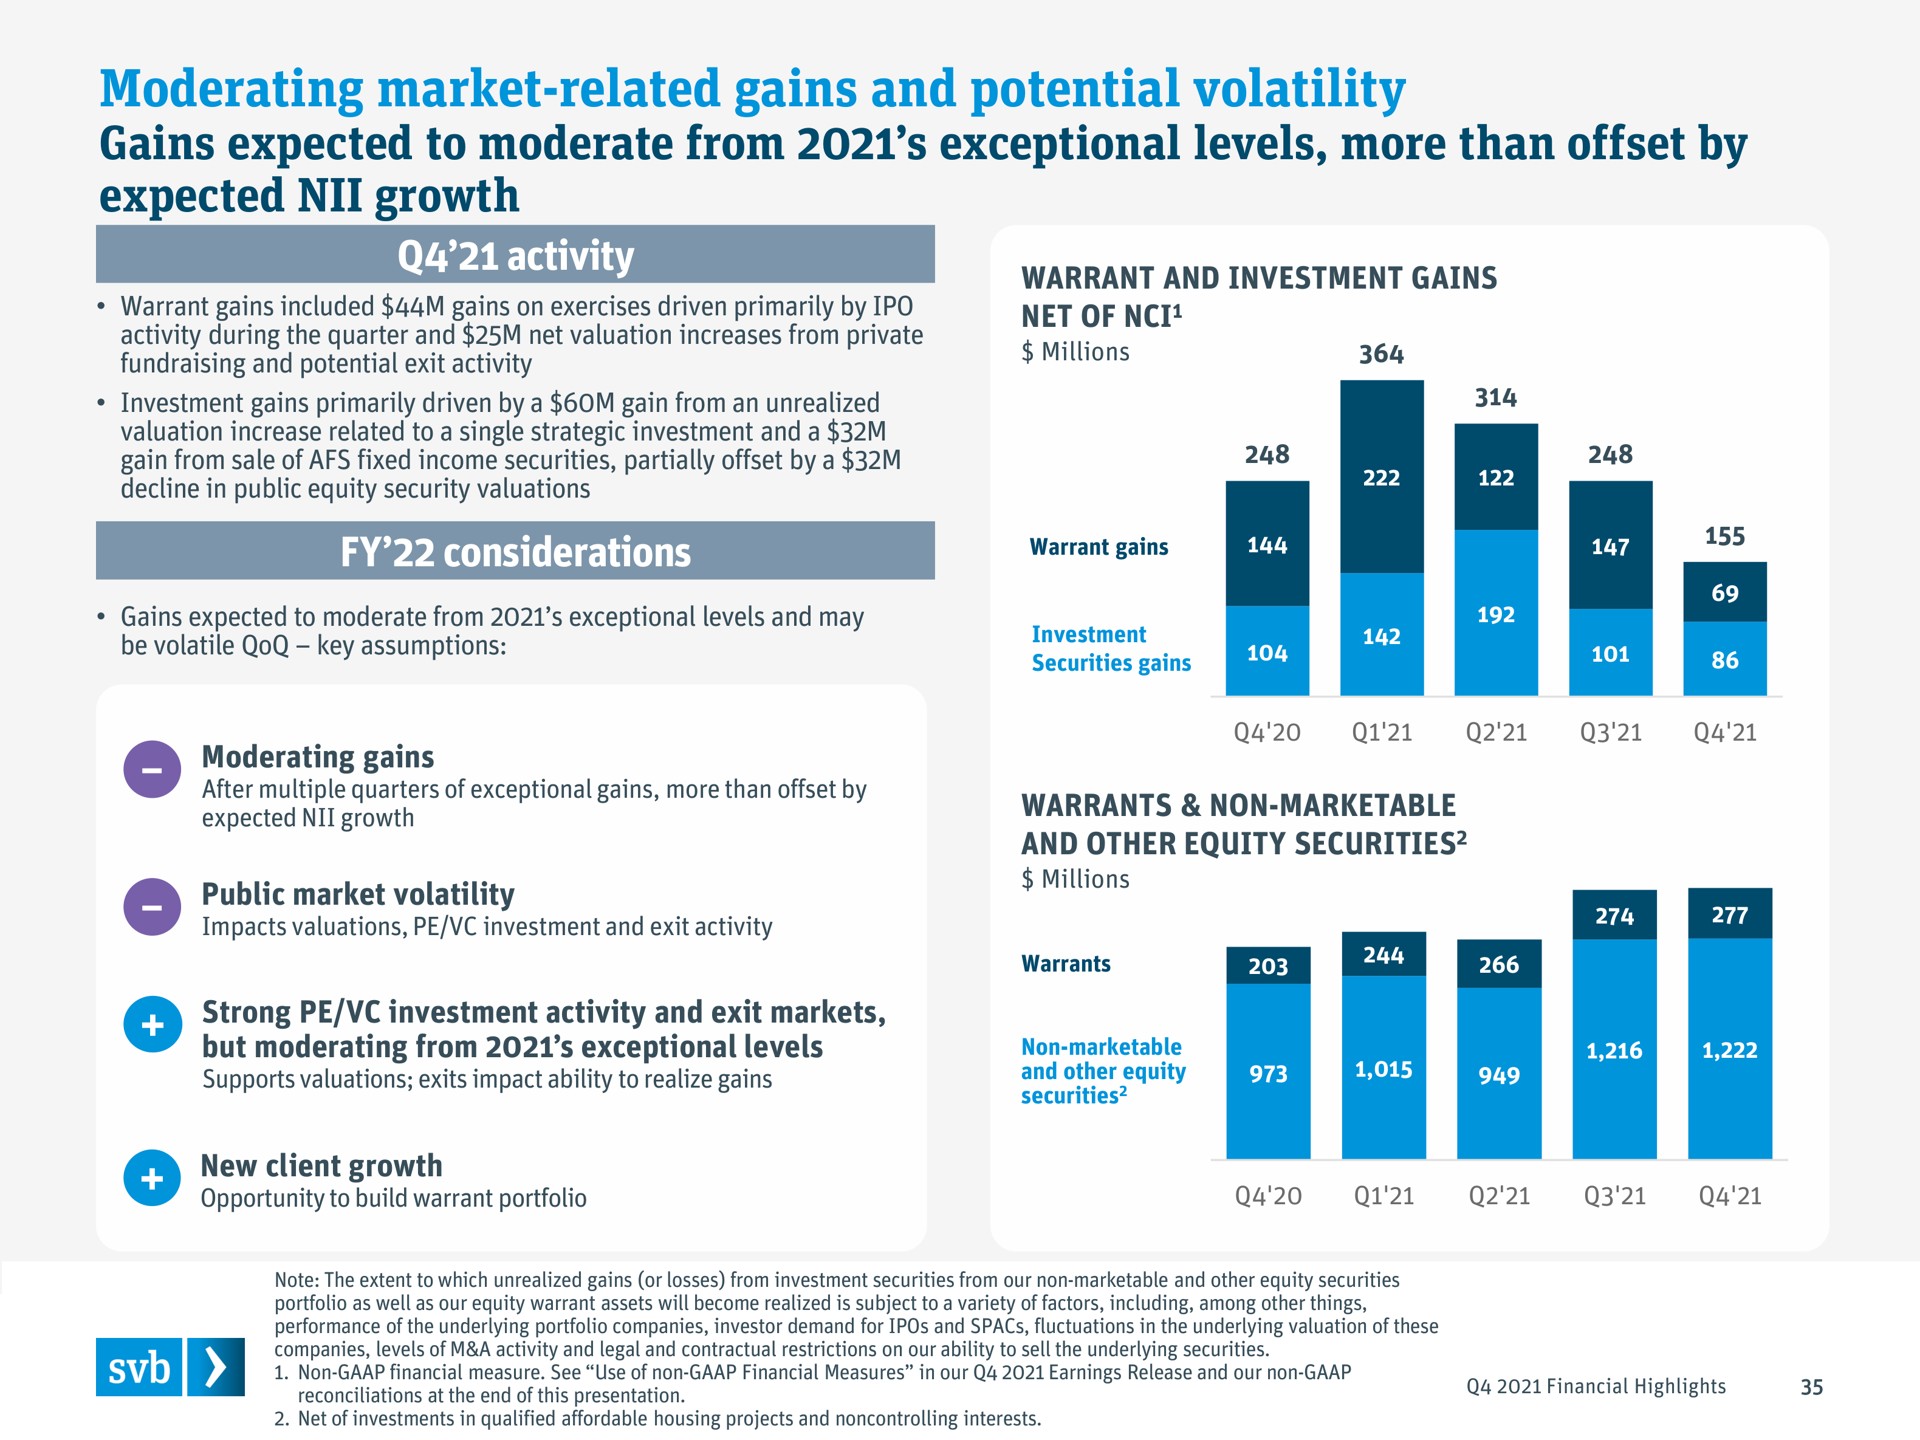 moderating market related gains and potential volatility gains expected to moderate from exceptional levels more than offset by expected growth | Silicon Valley Bank